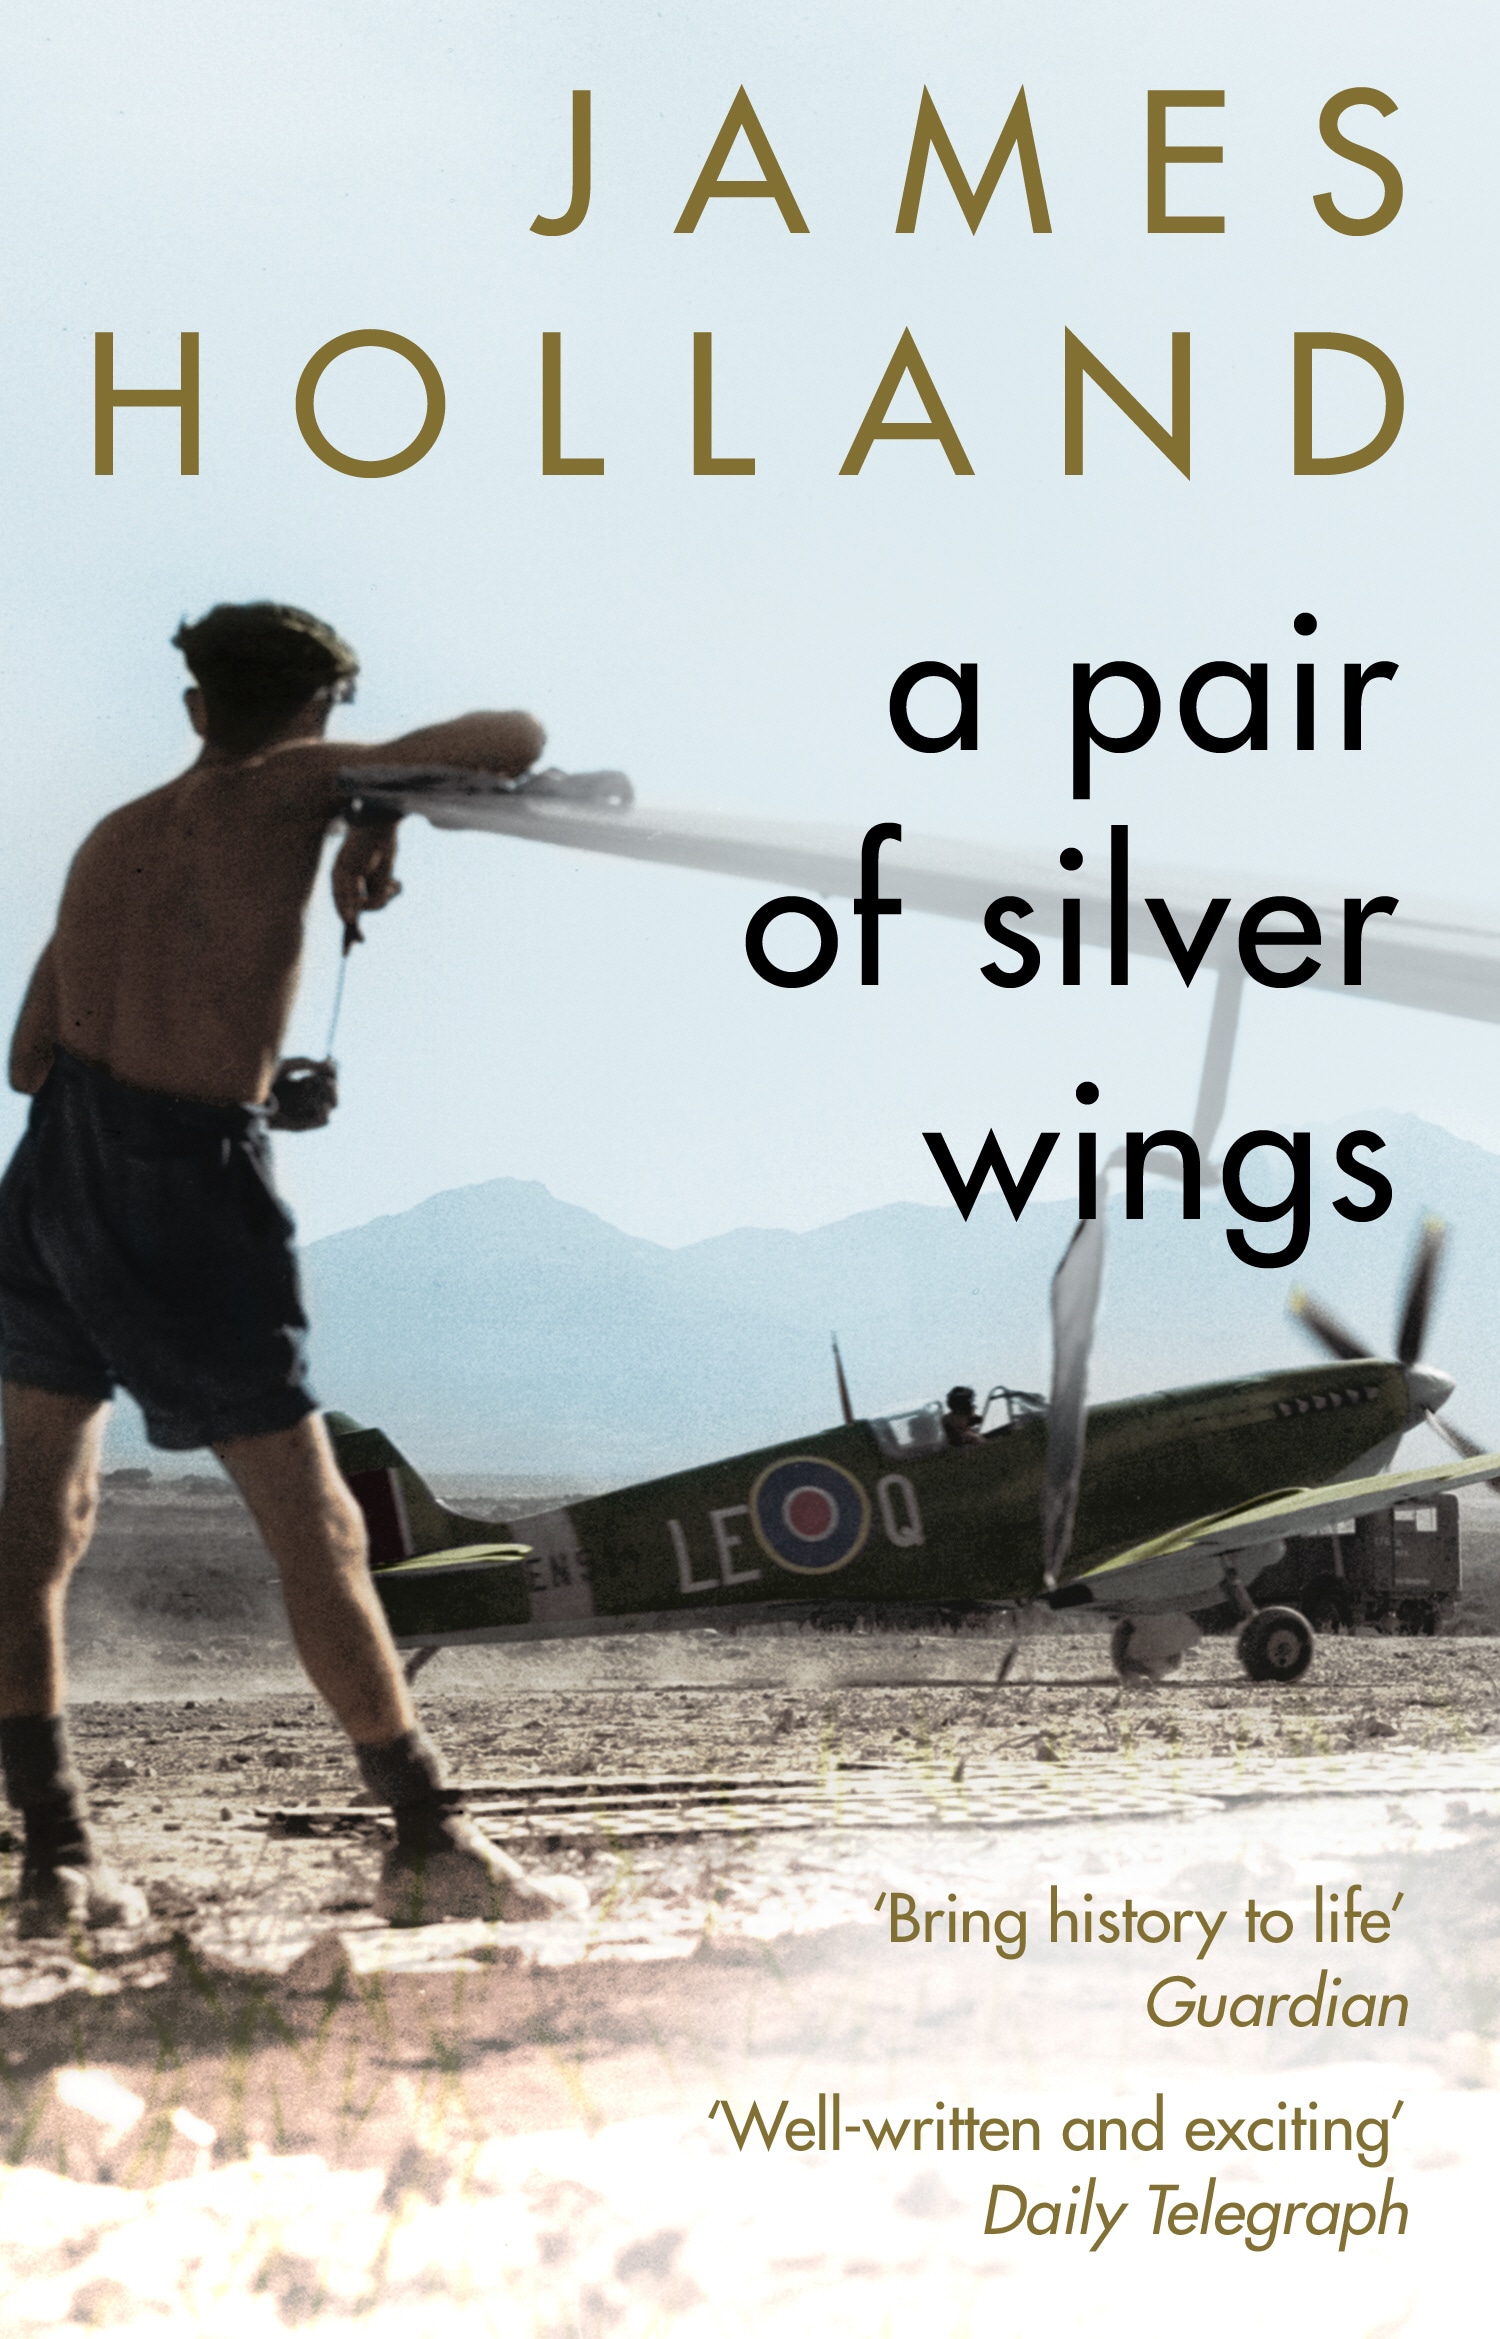 Book “A Pair of Silver Wings” by James Holland — April 4, 2019